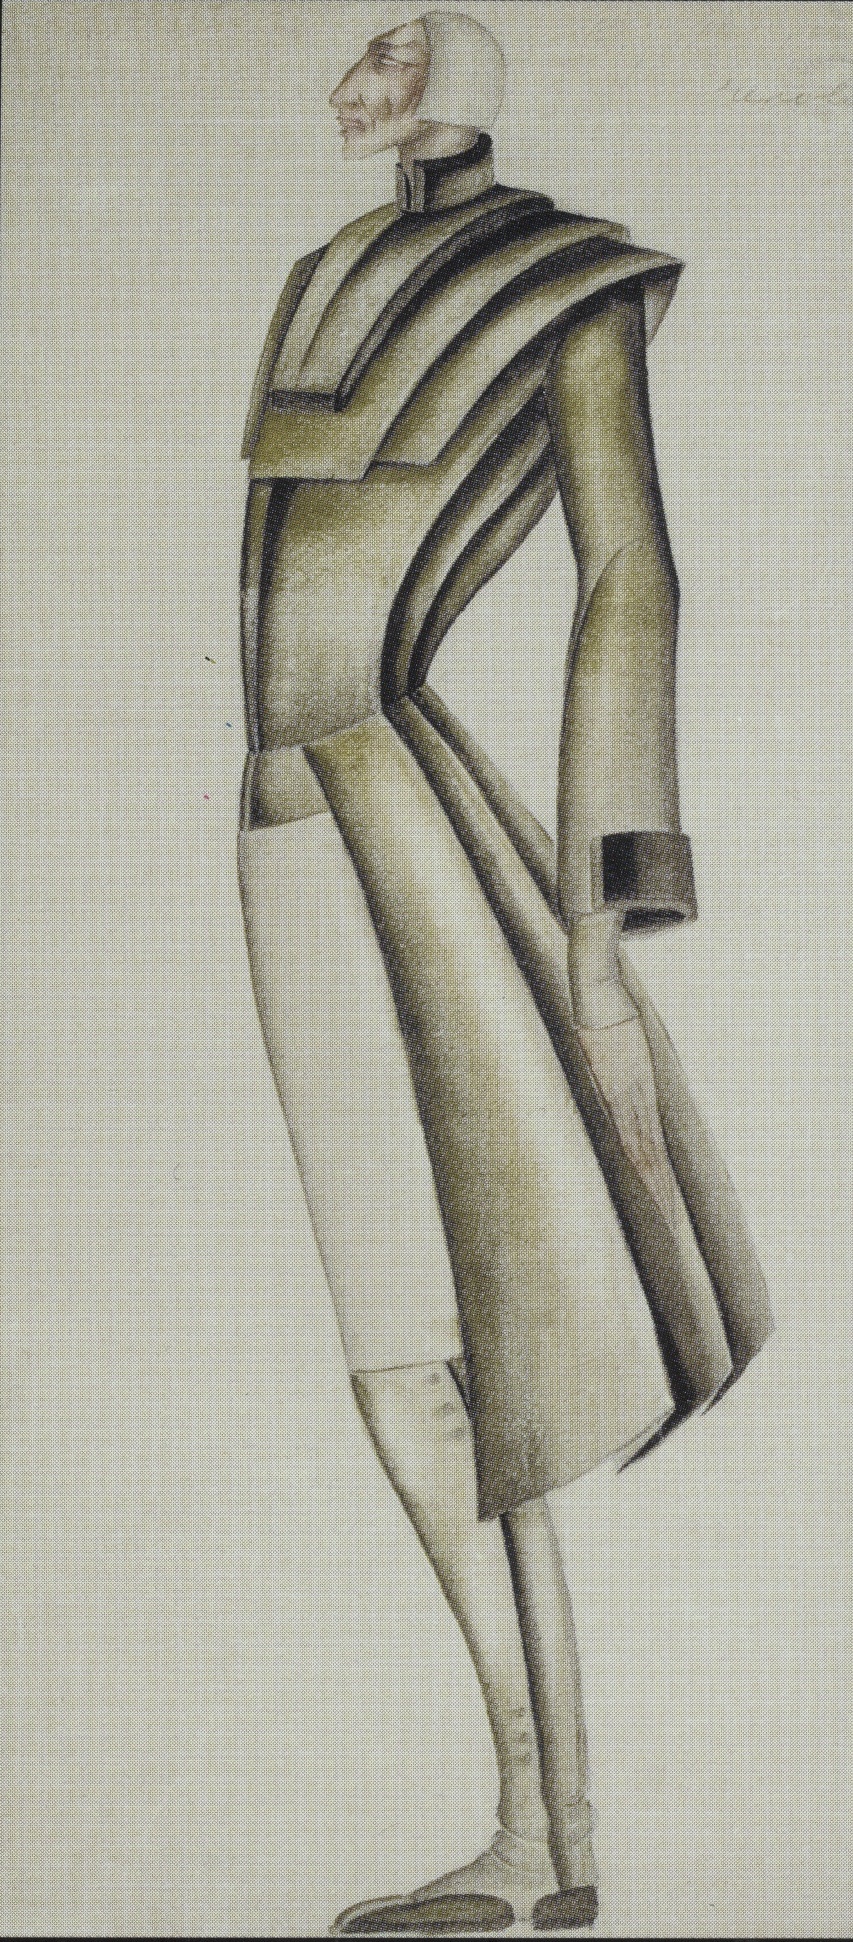 paper, watercolor,  39x19 1932 State Museum of Drama, Music, Film and Choreography